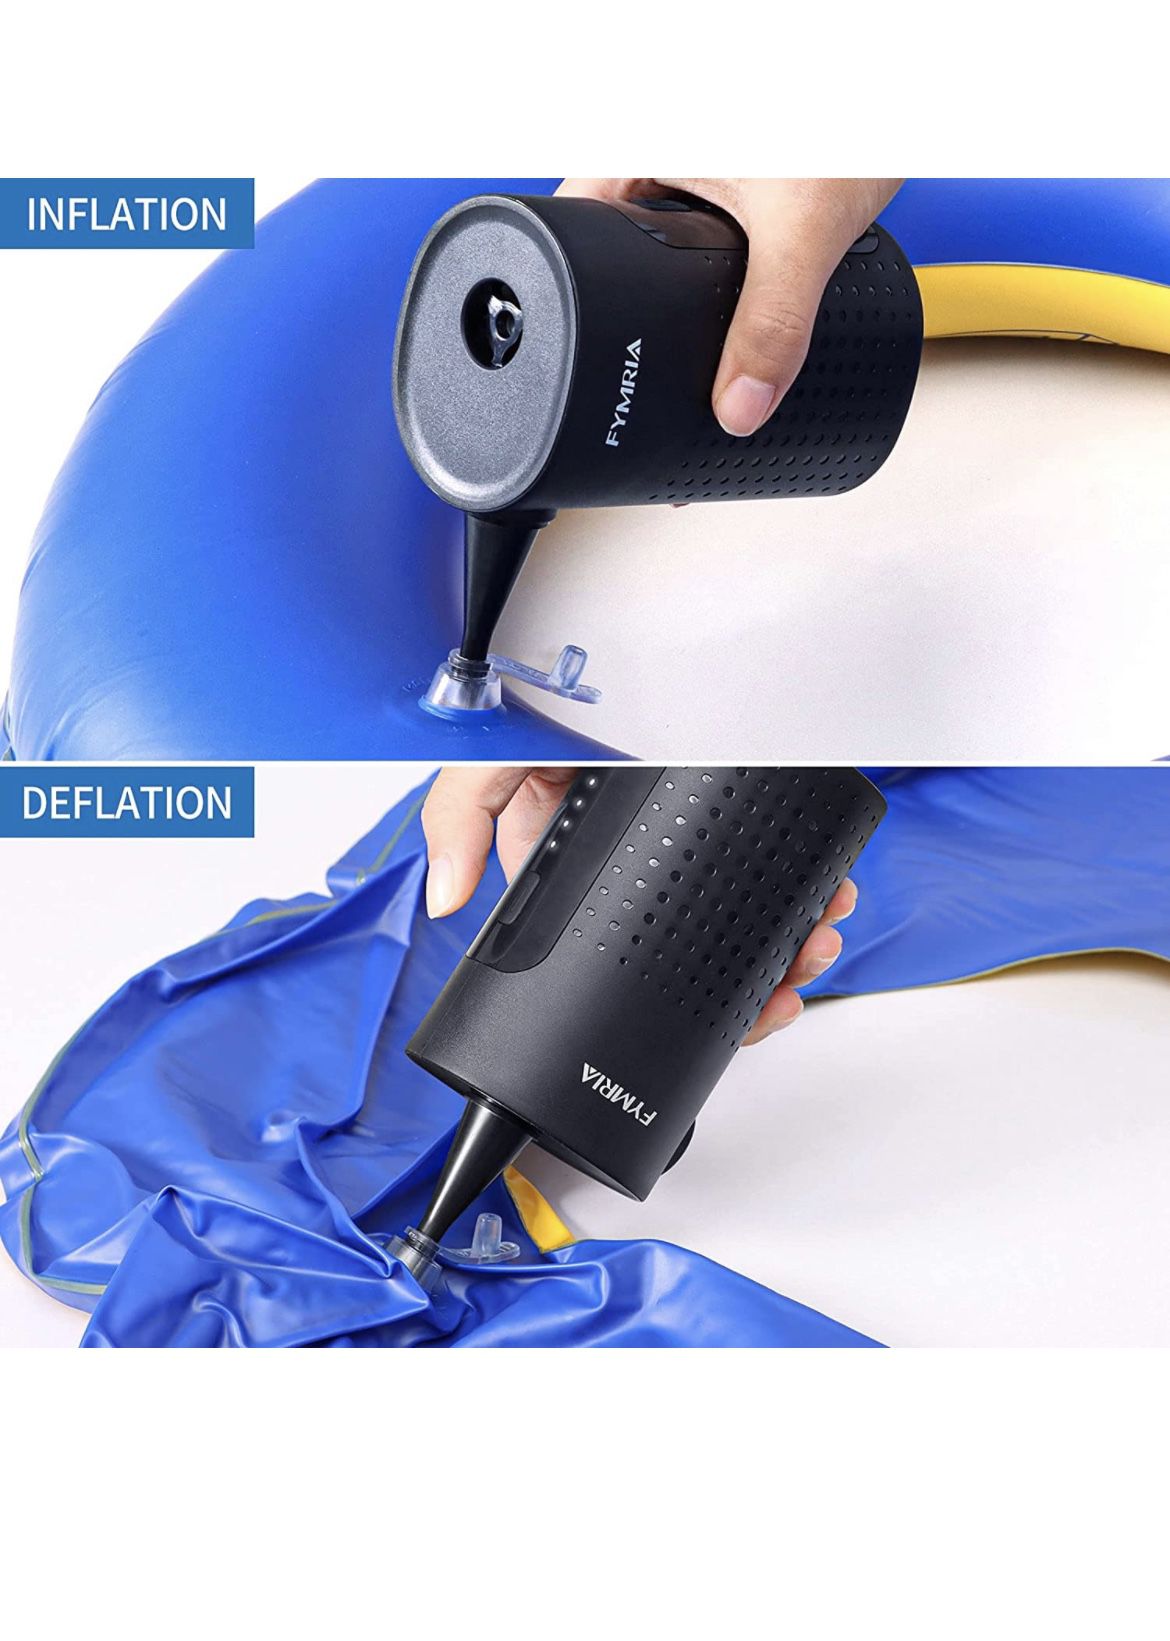 Electric Air Pump, Portable Quick-Fill Air Pump with 3 Nozzles, USB 4000mAh Battery Rechargeable Inflator Deflator Pump for Air Mattress Bed, Swimming